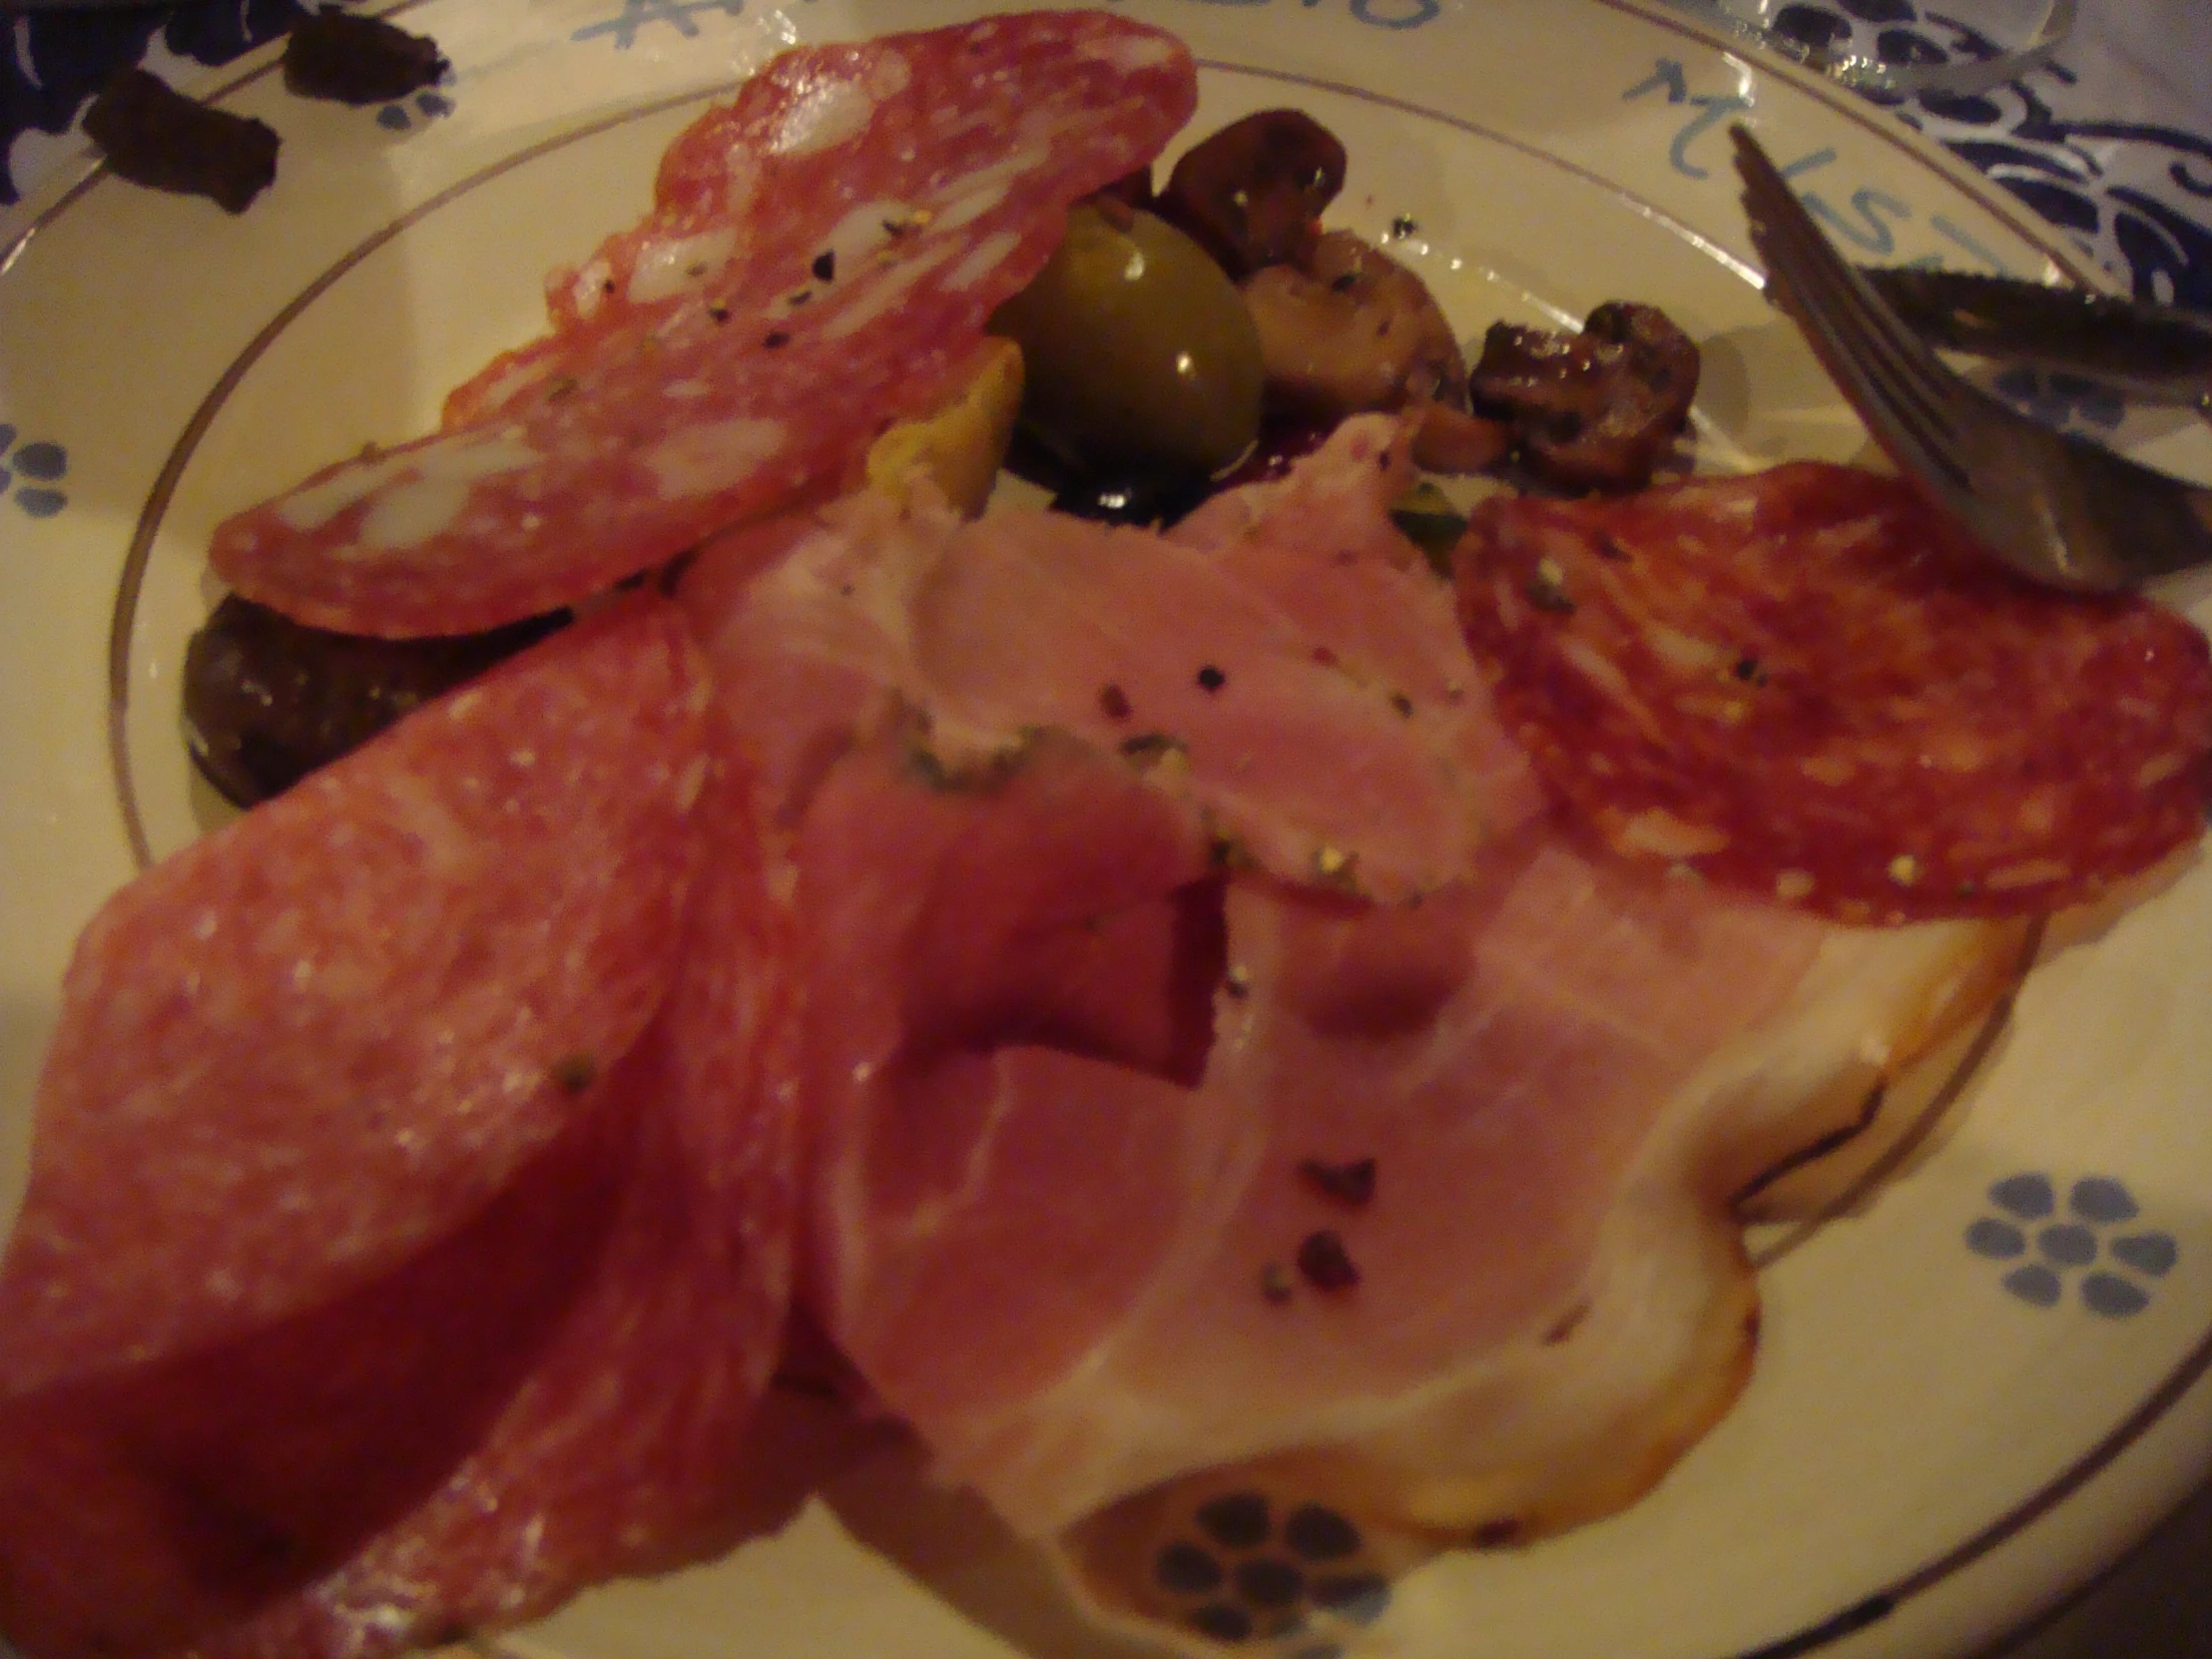 plate with ham, olives, tomatoes and mushrooms on it